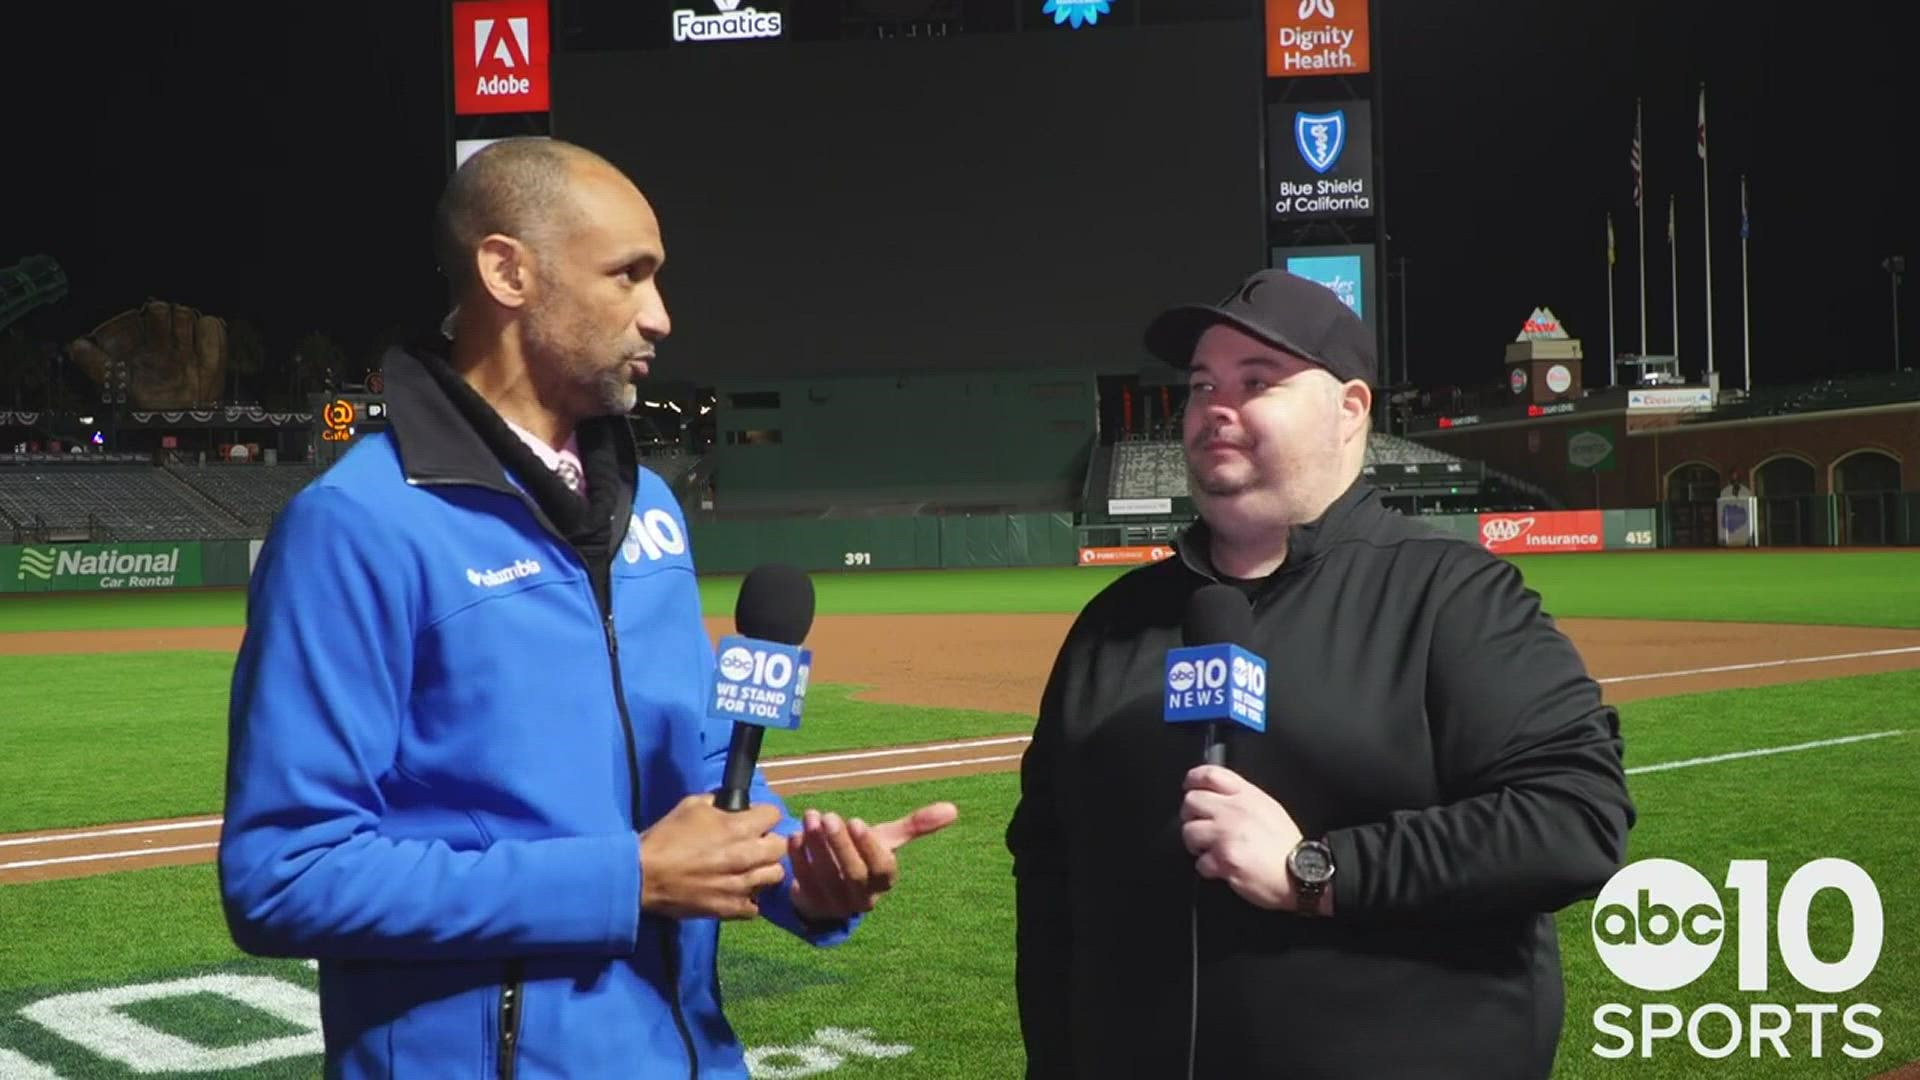 ABC10's Kevin John and Sean Cunningham, on the field of Oracle Park, discuss the Dodgers victory over the Giants in the deciding Game 5 of the NLDS.